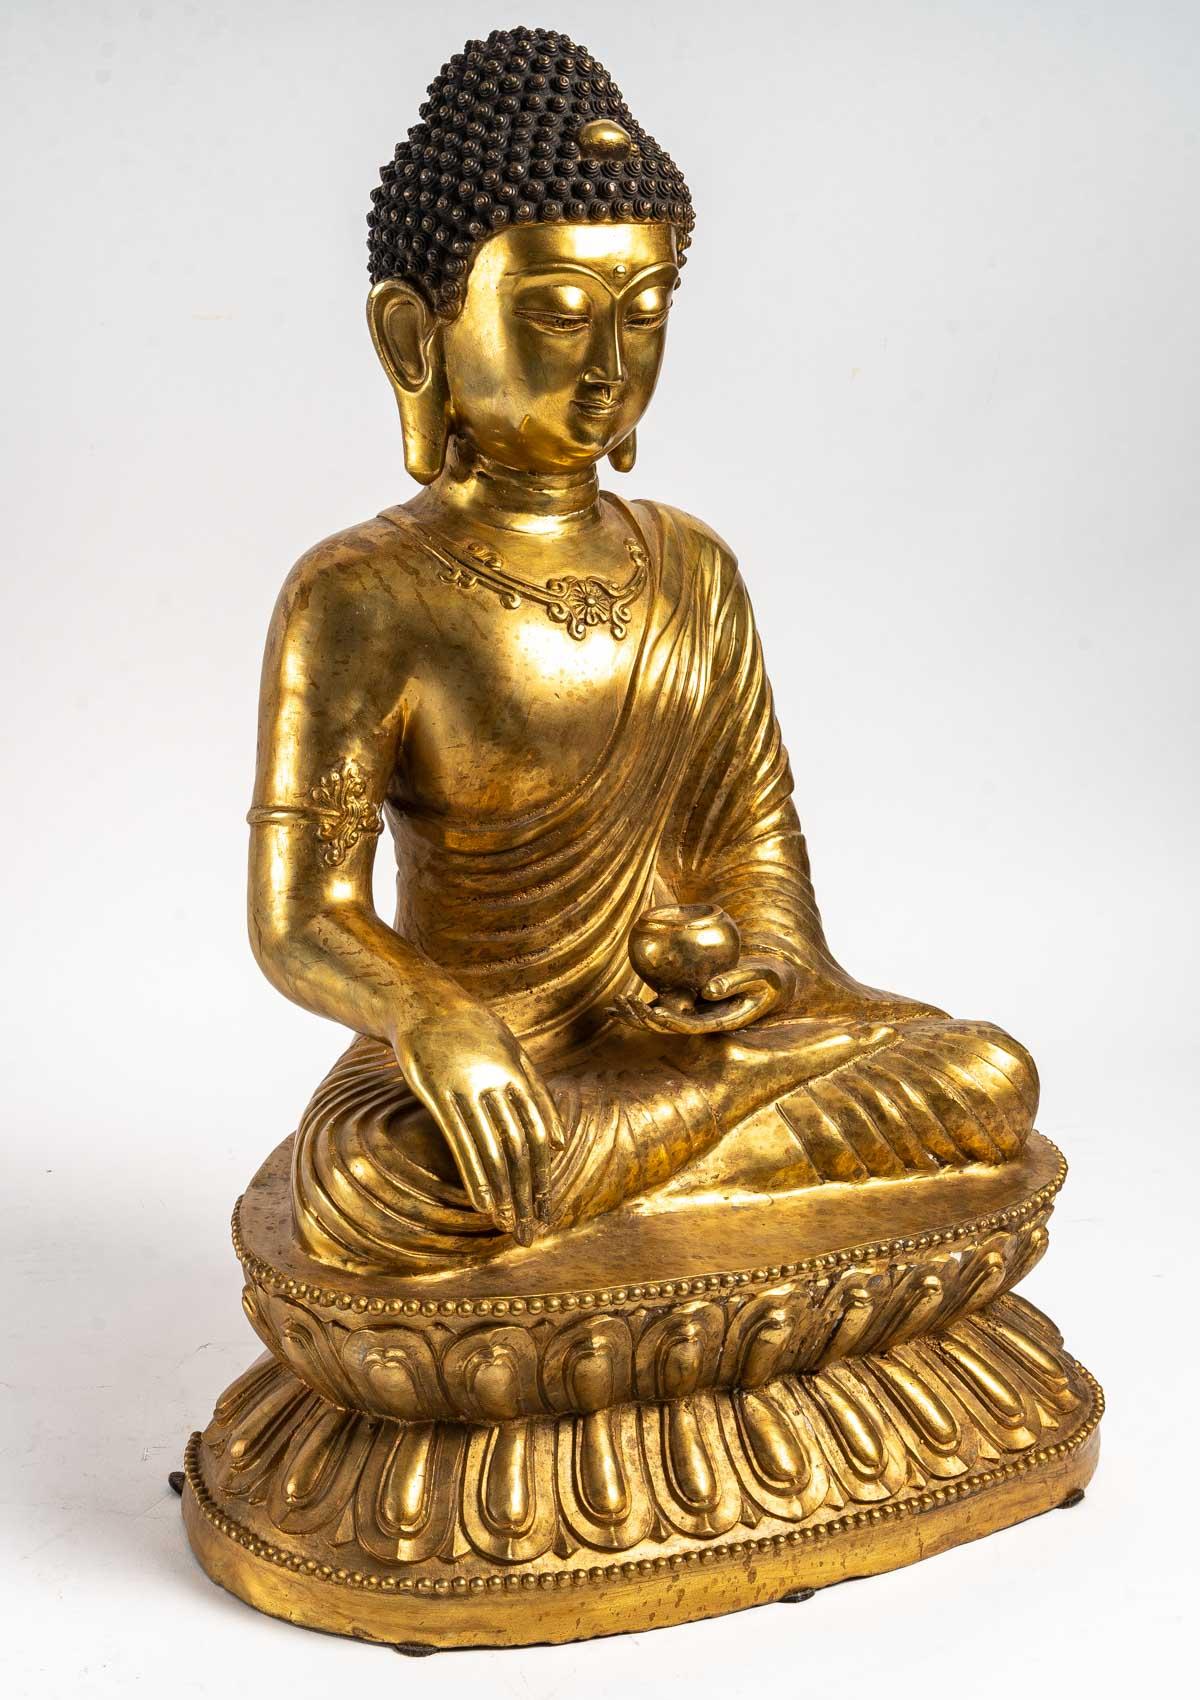 Large copper alloy Buddha seated on a stylized lotus base.
China, 20th century 
Measures: H: 25 cm, W: 37 cm, D: 20 cm.